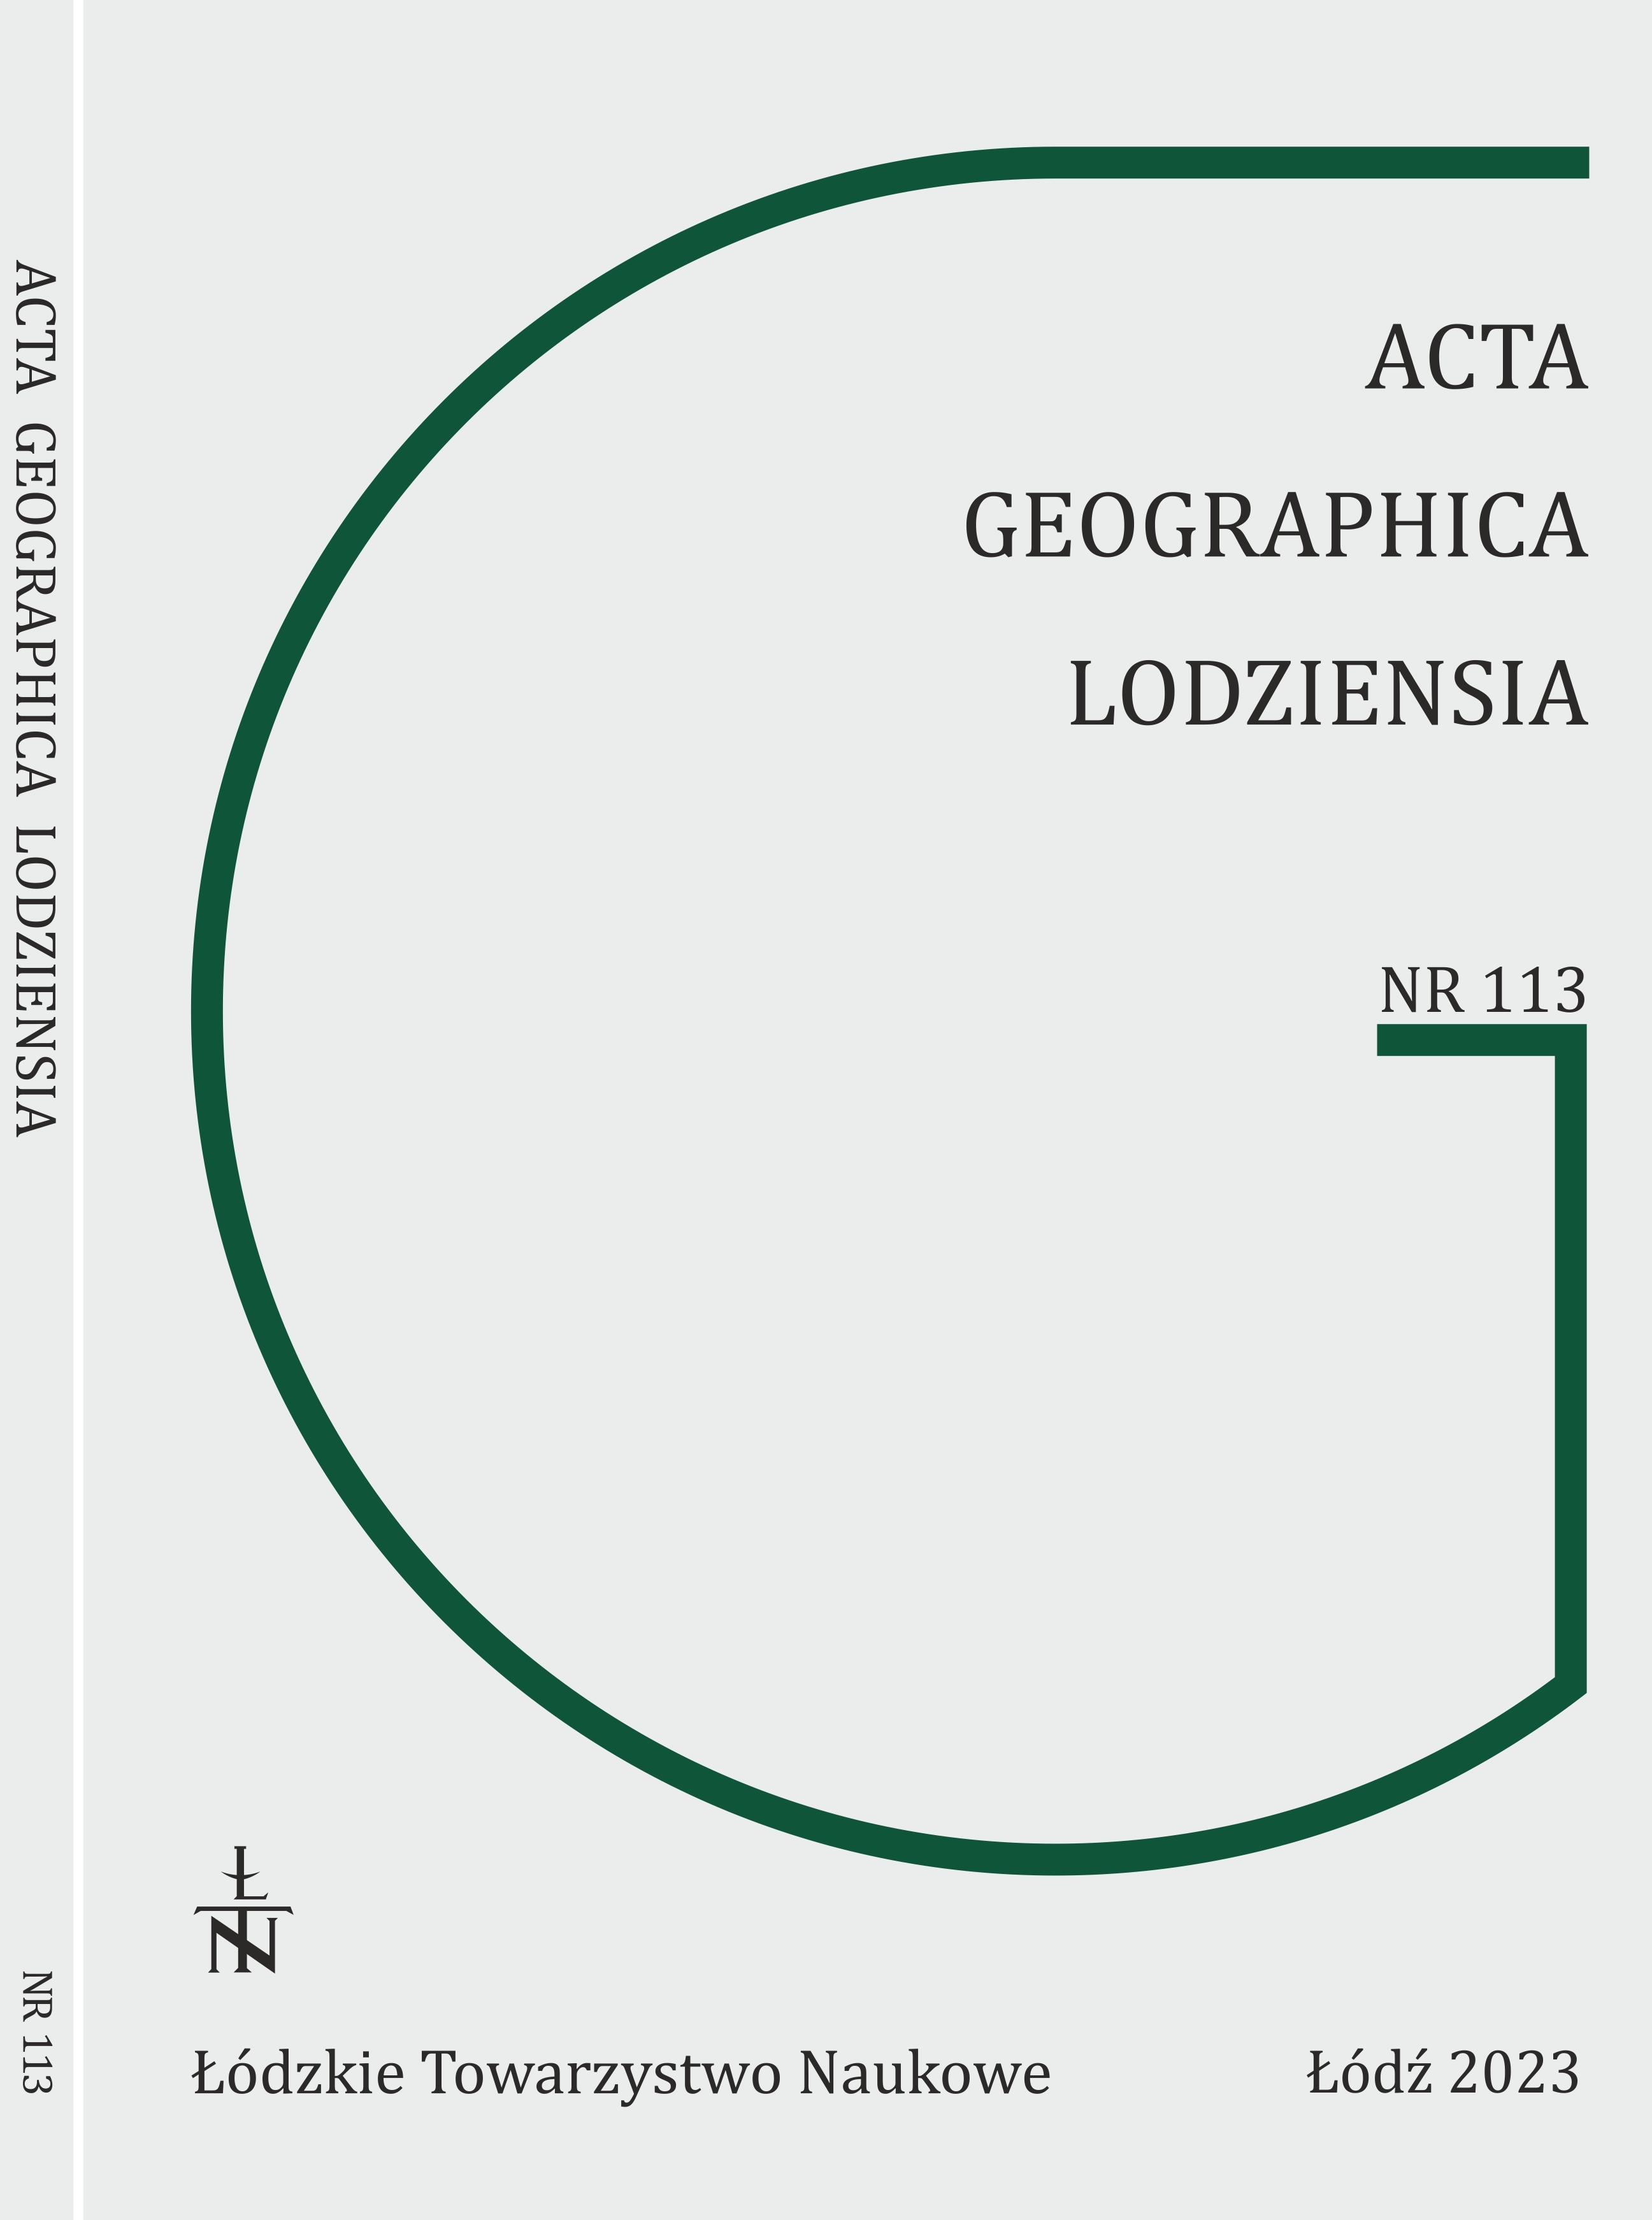 GEOCHEMICAL CHARACTERISTICS OF LATE GLACIAL
AND HOLOCENE BIOGENIC SEDIMENTS IN CENTRAL POLAND
AND IMPLICATIONS FOR RECONSTRUCTING
THE PALAEOENVIRONMENT Cover Image